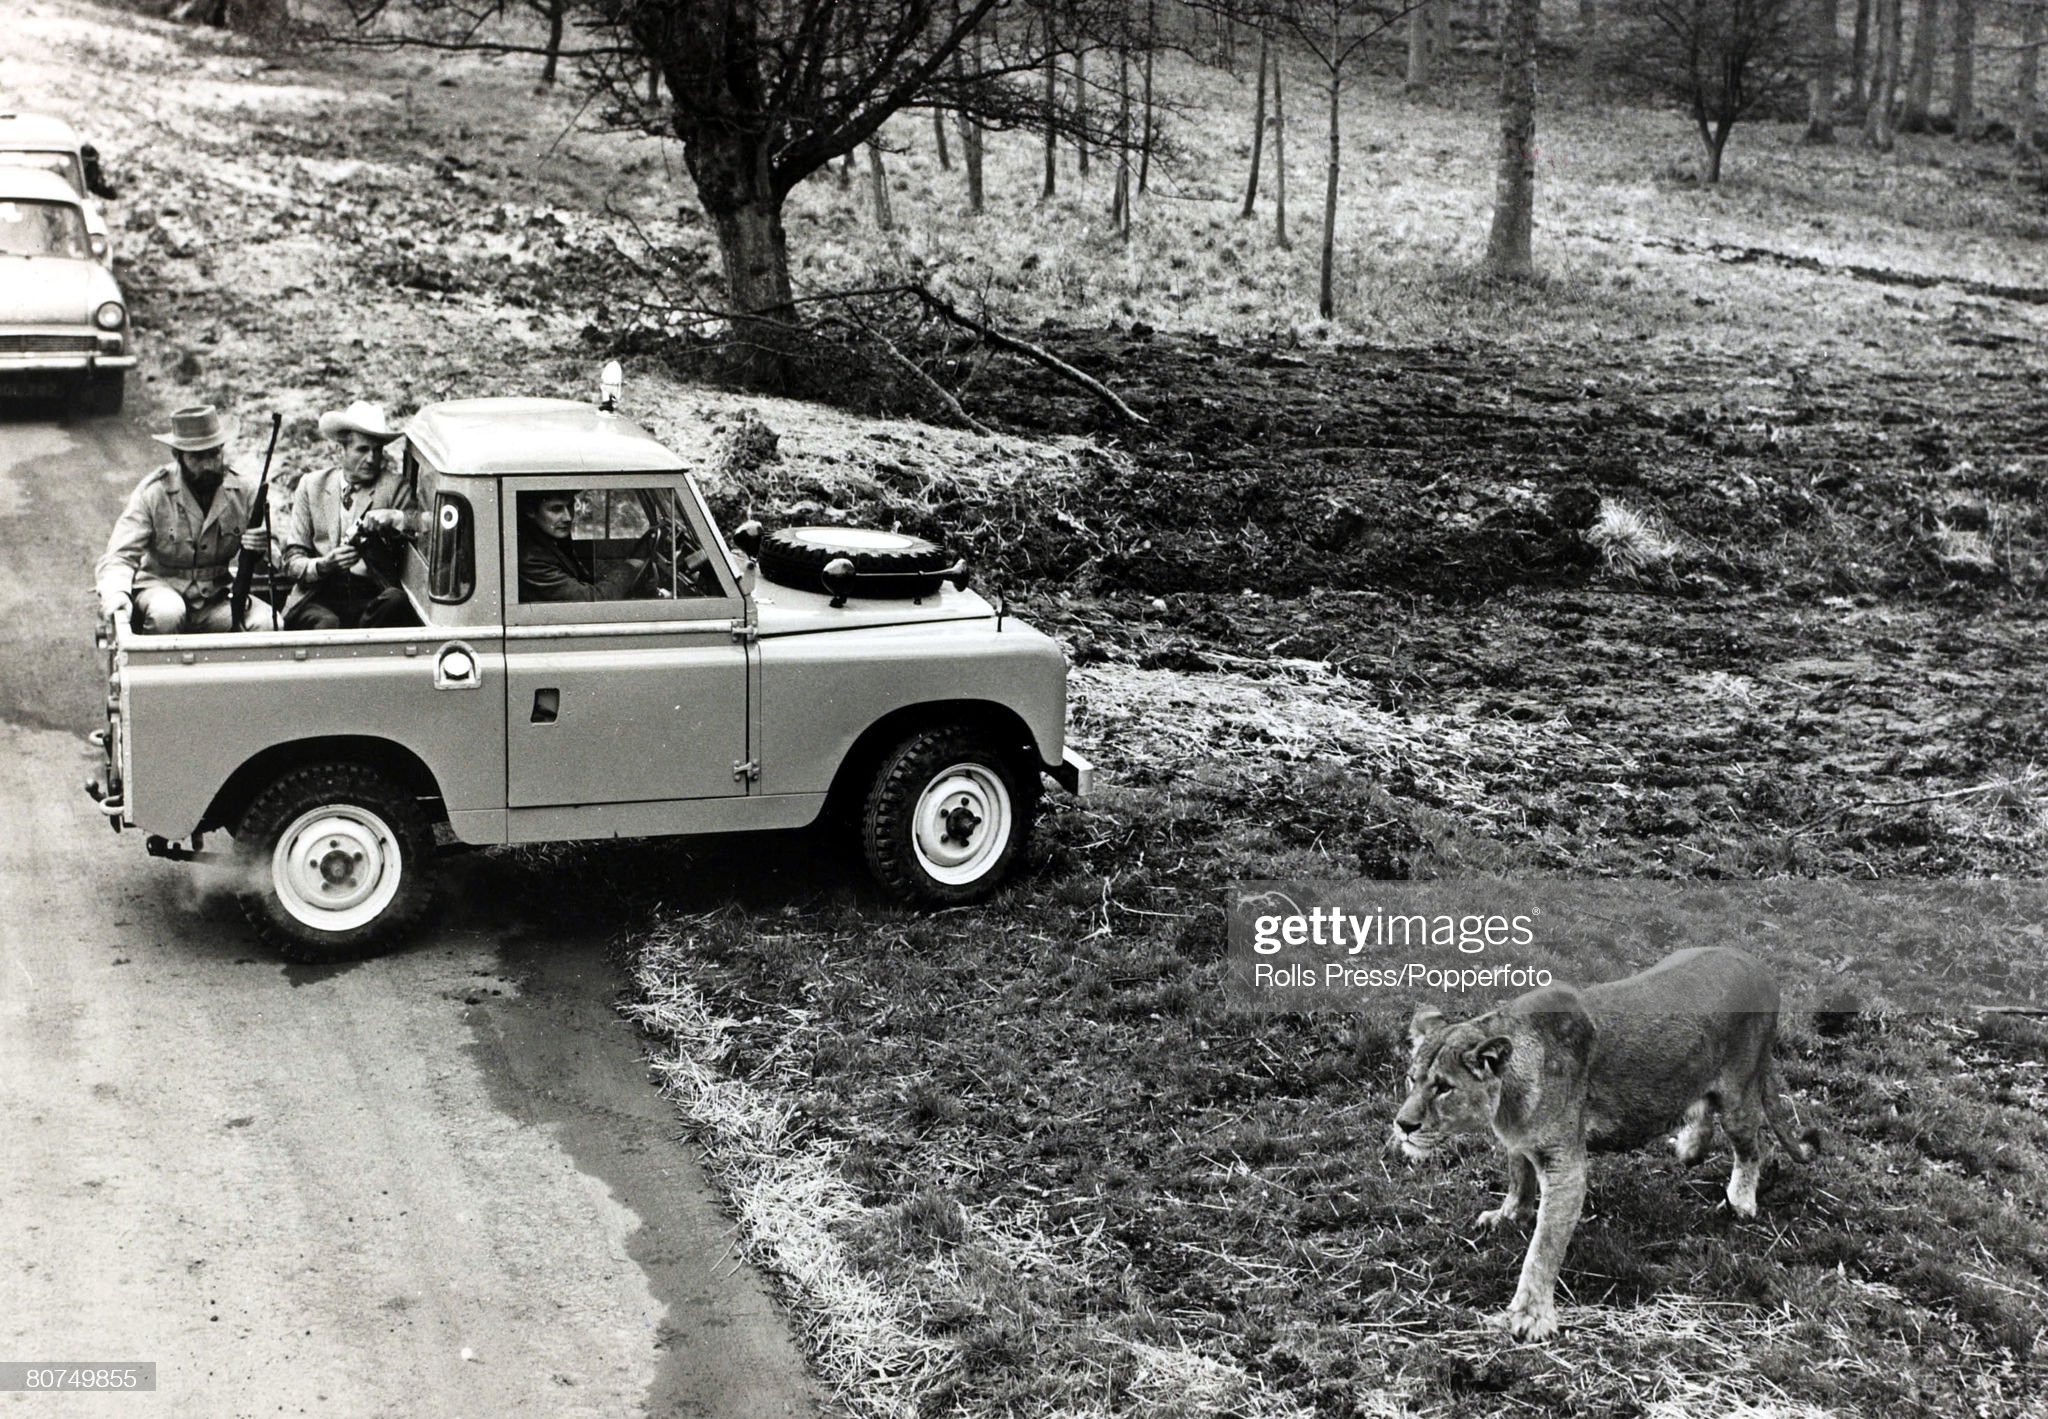 5th April 1966, the Marquess of Bath pictured with an armed guard in the back of a Land Rover at his stately home at Longleat as they carefully watch a lioness, The Longleat House estate had been turned over into a game reserve as an added attraction. 